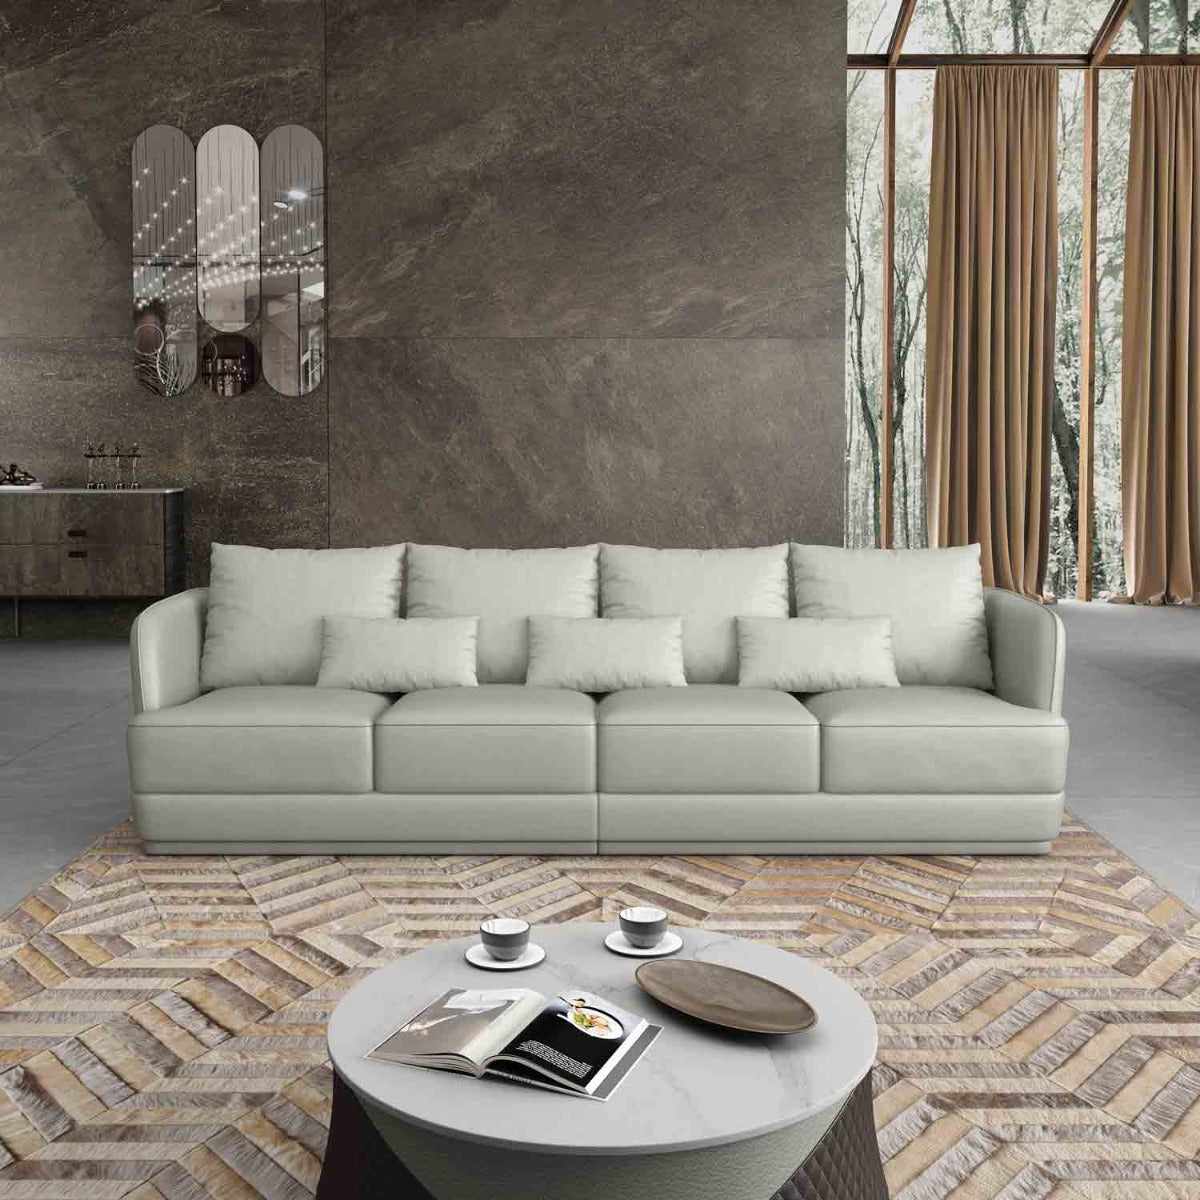 European Furniture - Glamour Ovesize Sofa in Grey-Chocolate - 51618-4S - New Star Living